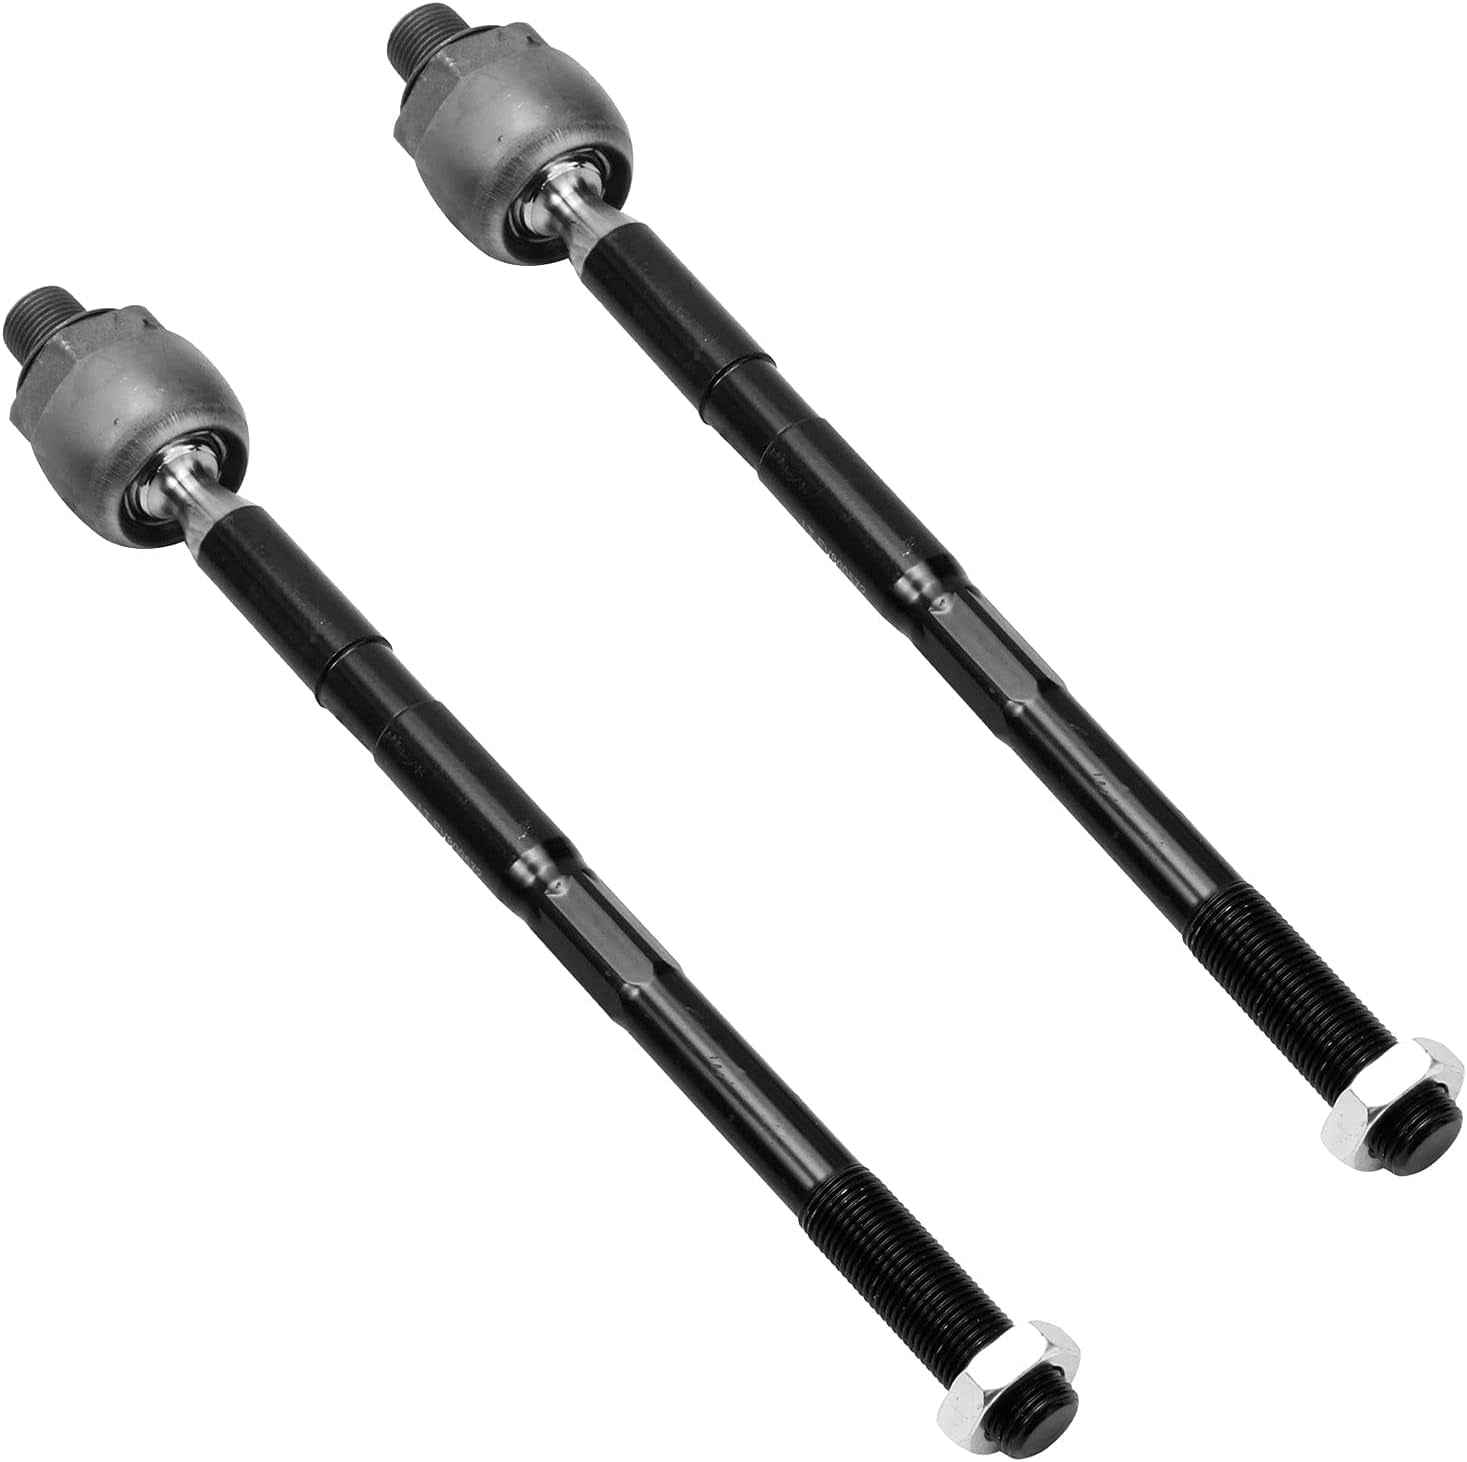 Detroit Axle - Front End 12Pc Suspension Kit for Chevy Traverse Buick Enclave GMC Acadia Saturn Outlook, 2 Wheel Bearing Hubs 2 Lower Control Arms 4 Tie Rods 2 Sway Bars 2 Boots Replacement